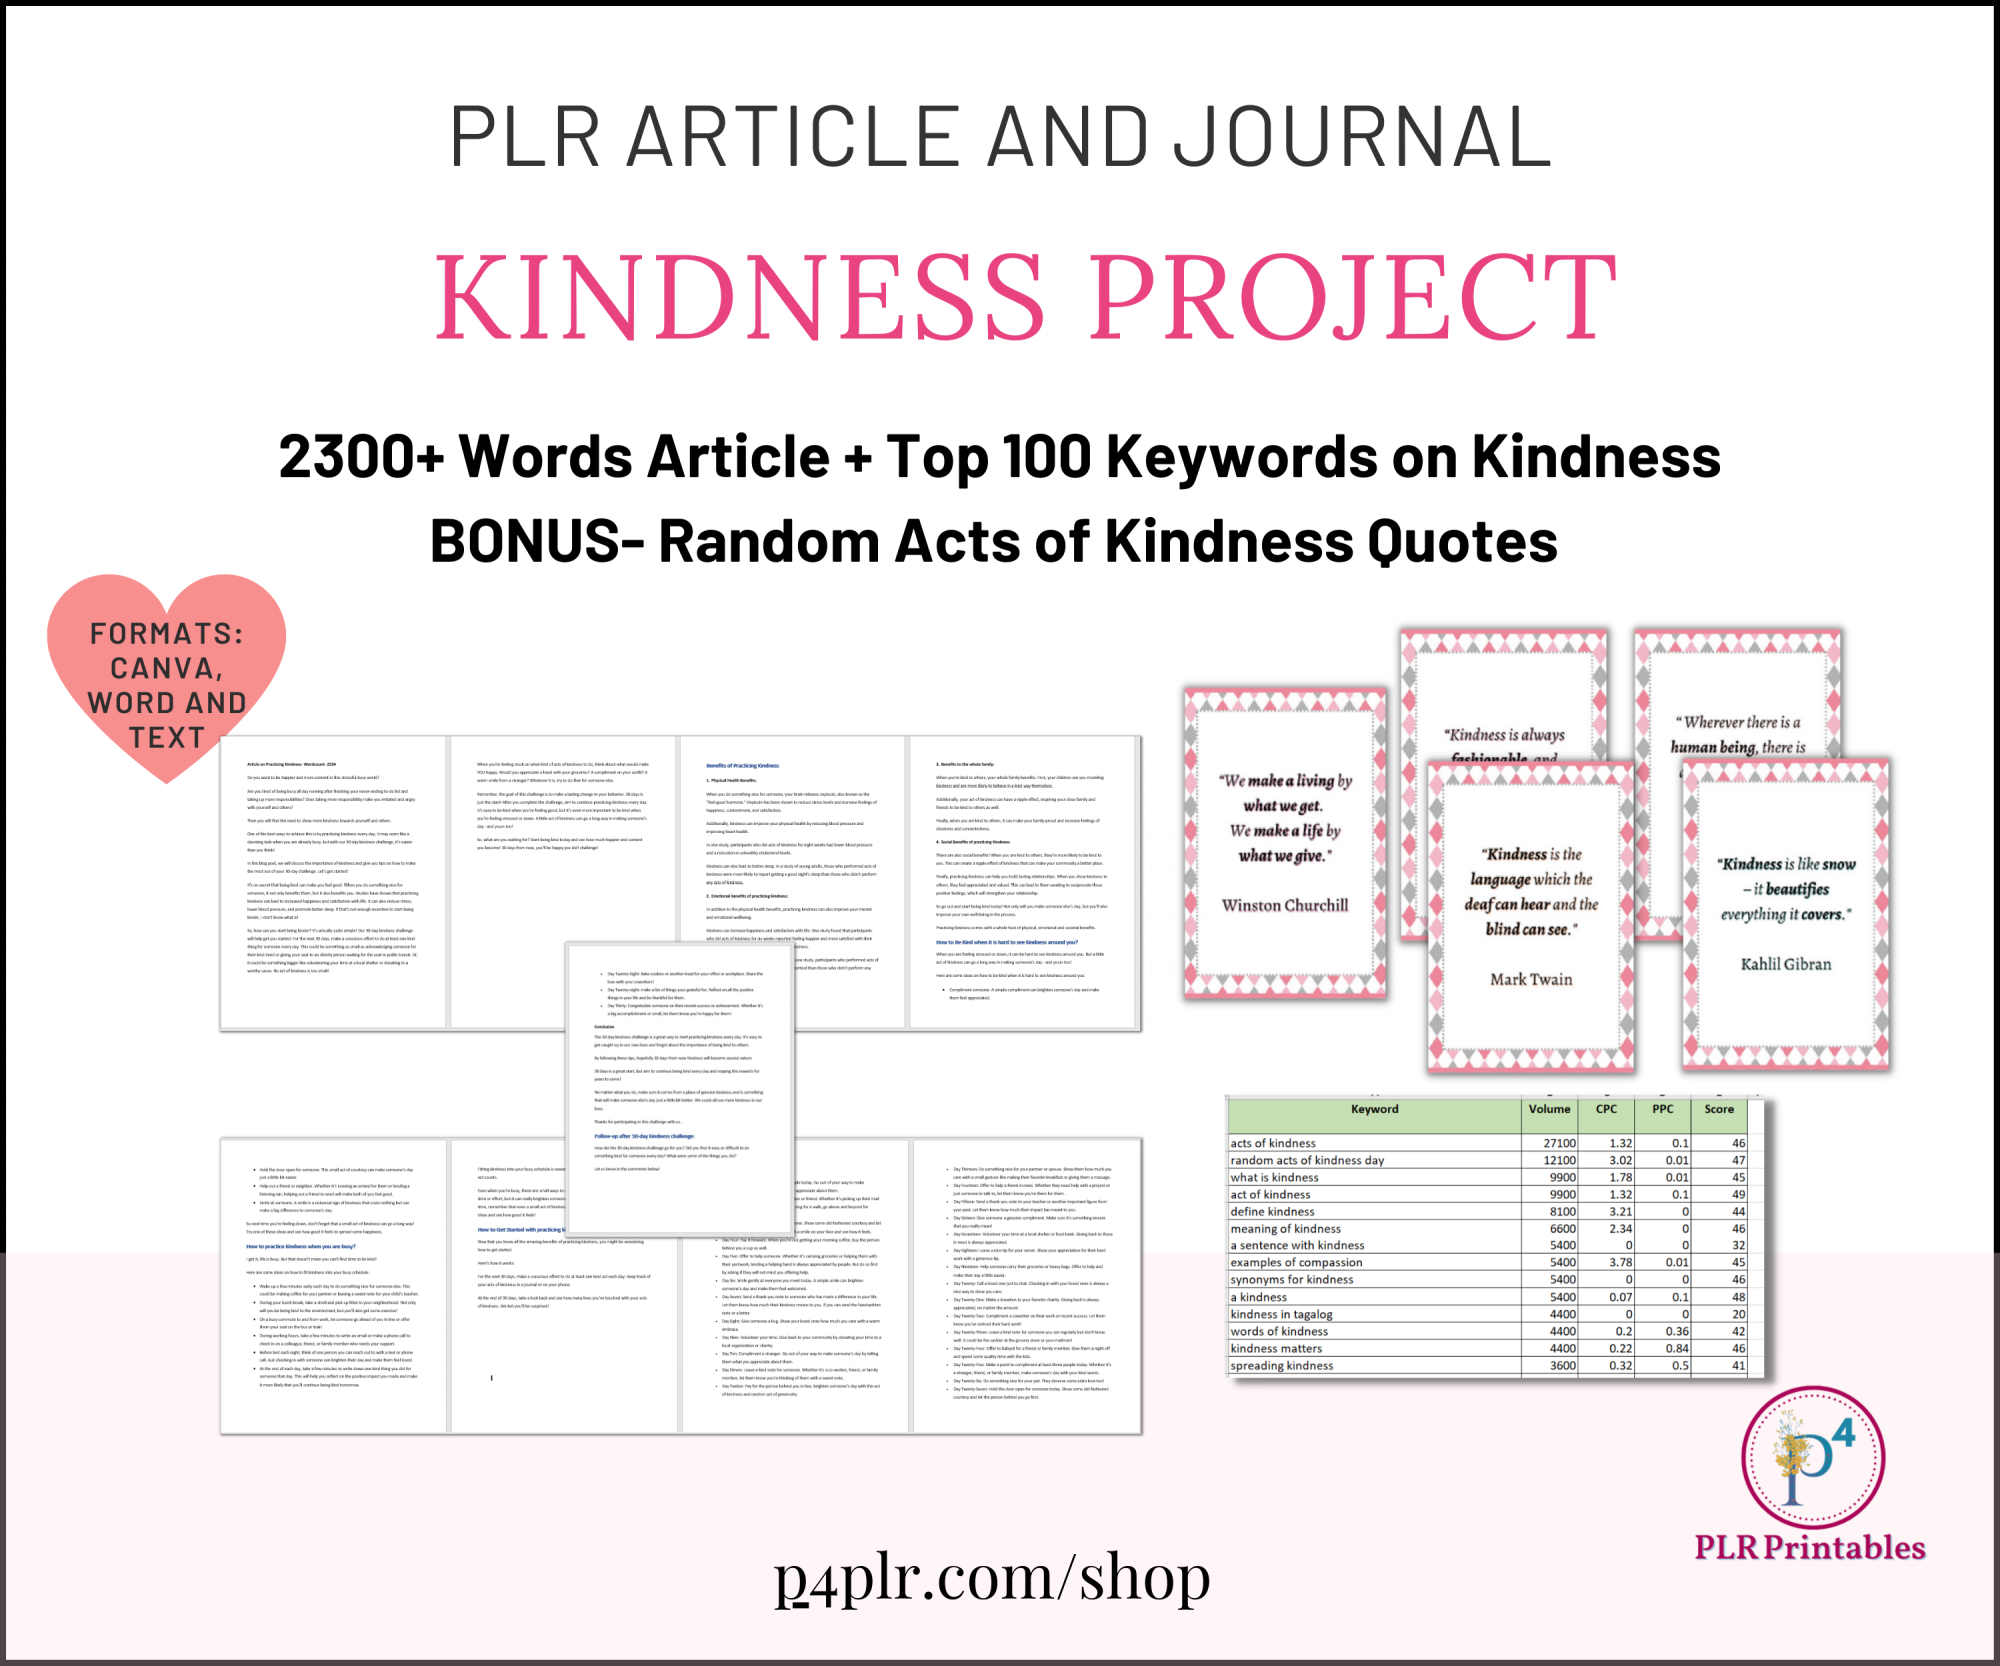 Kindness Project PLR Printables and Article Pack